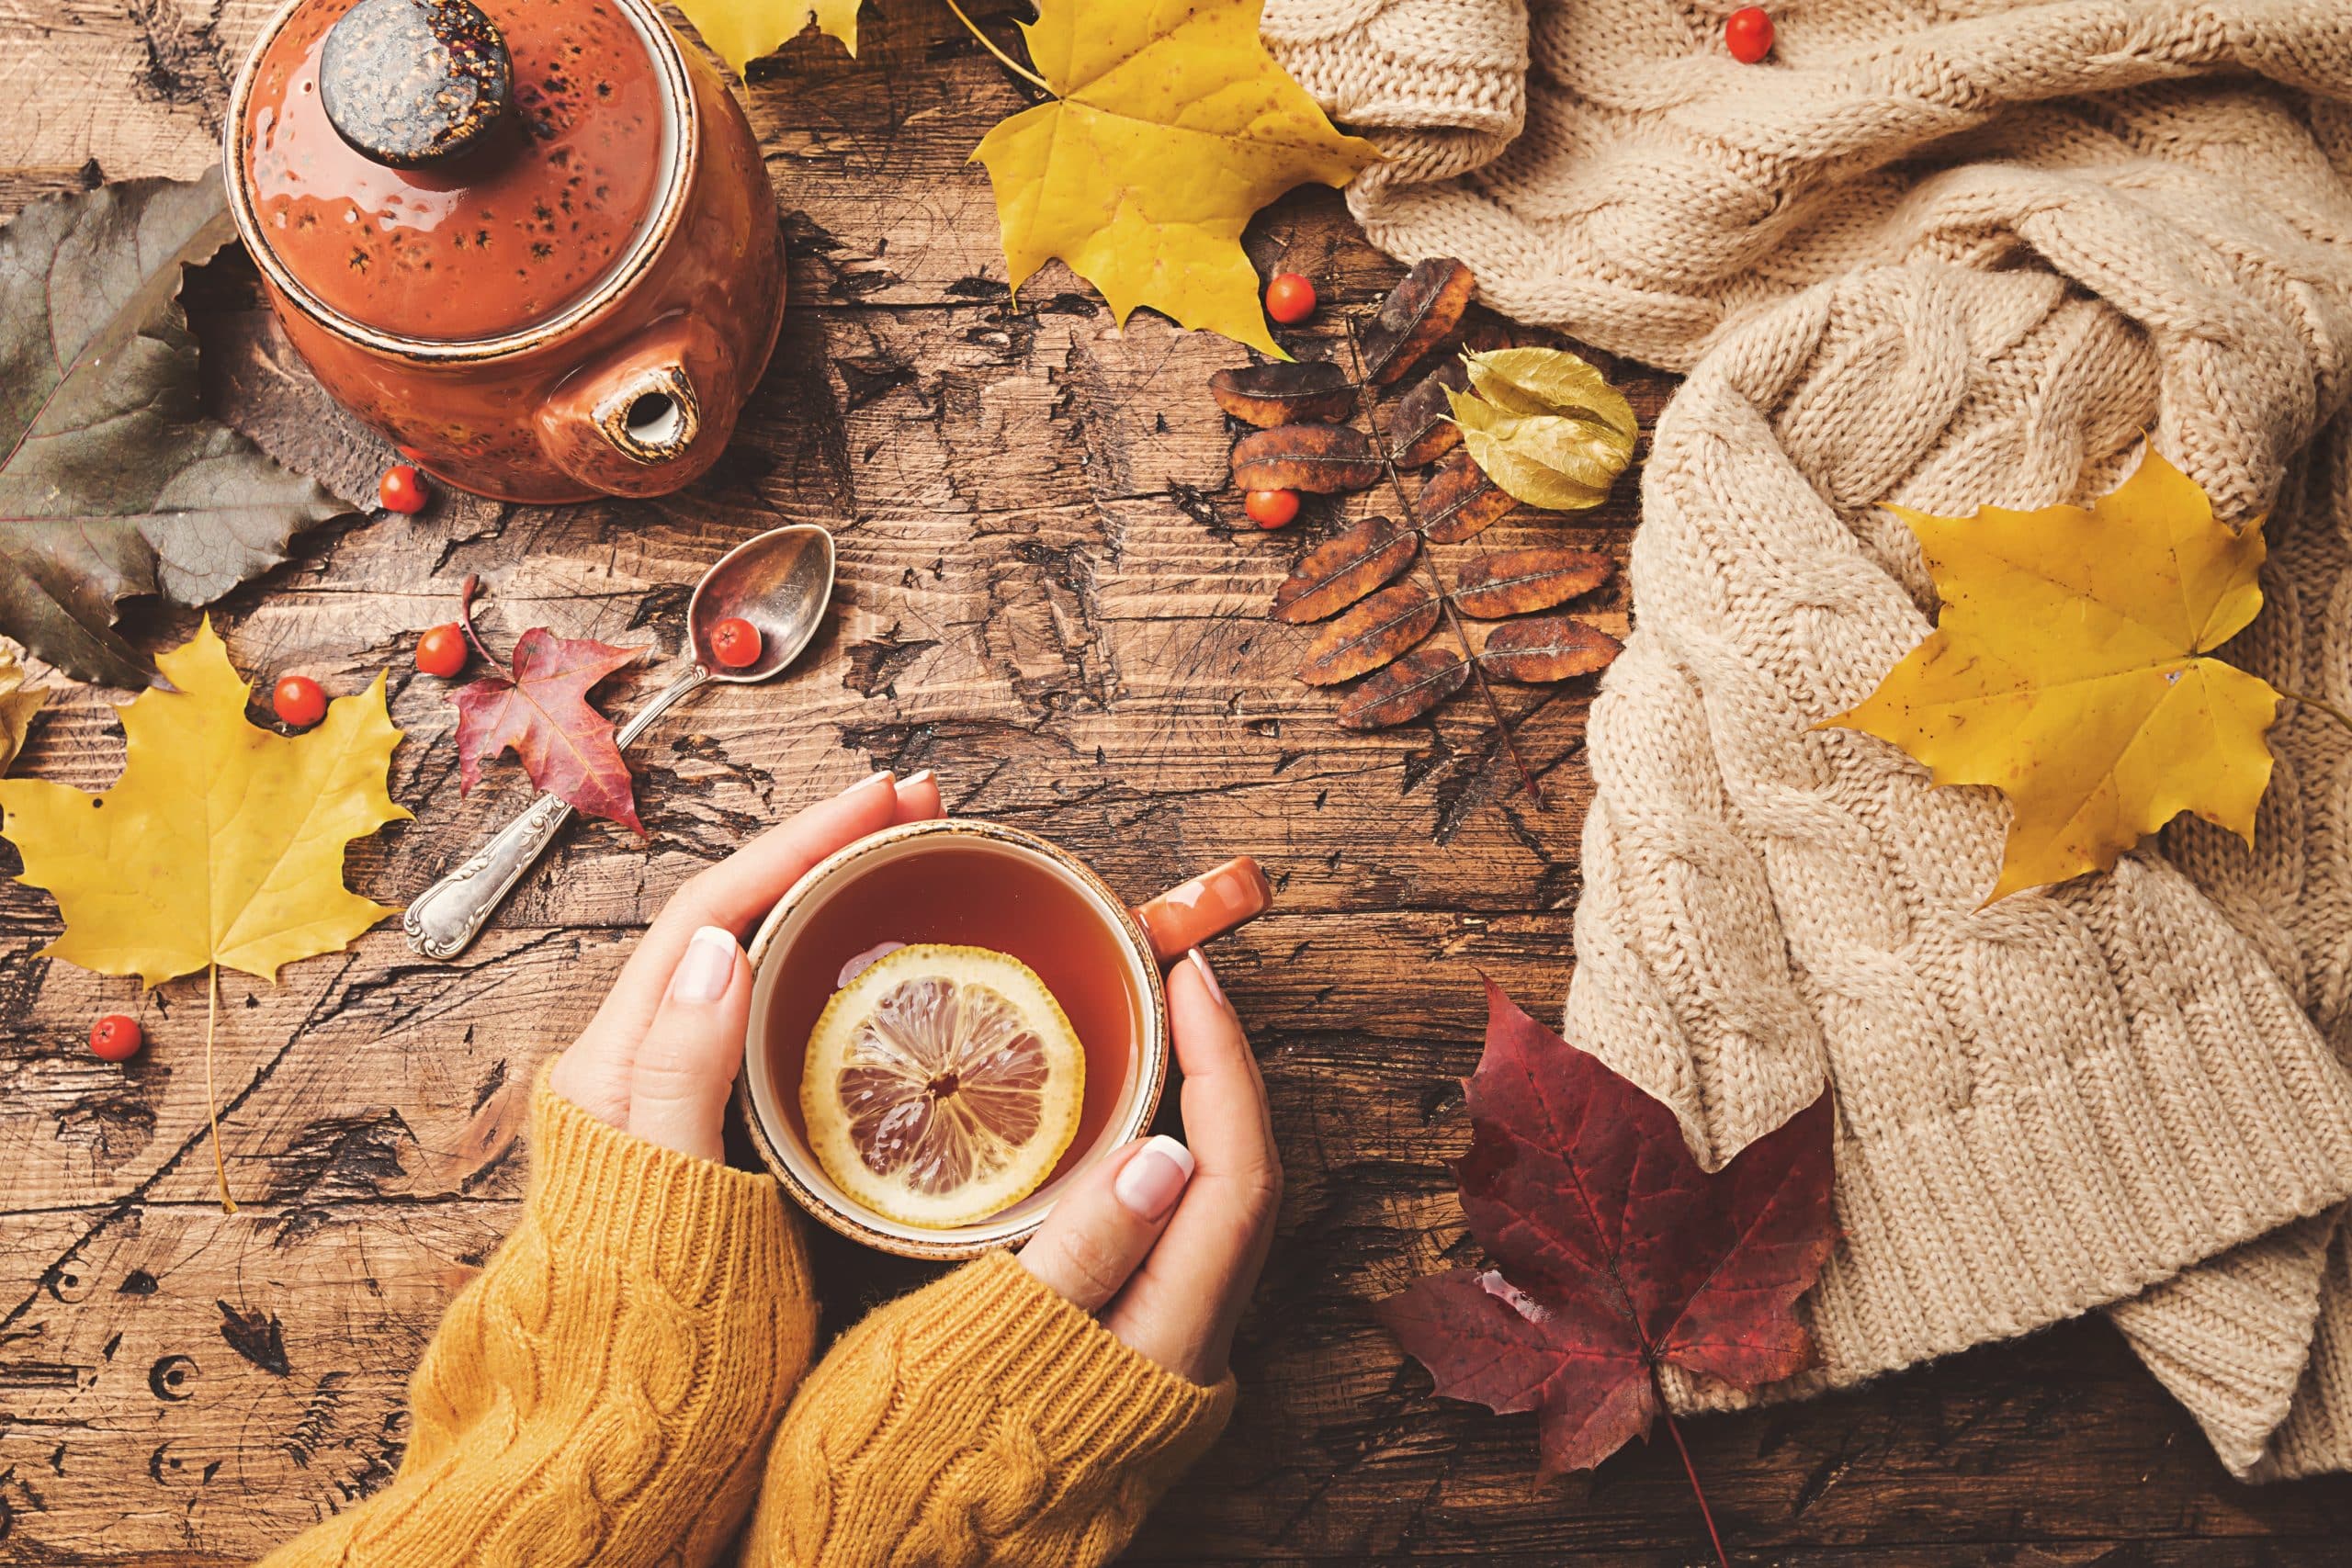 Fall Health Tips To Make Your Autumn And Winter Months Easier And More Fun  - BetterMe